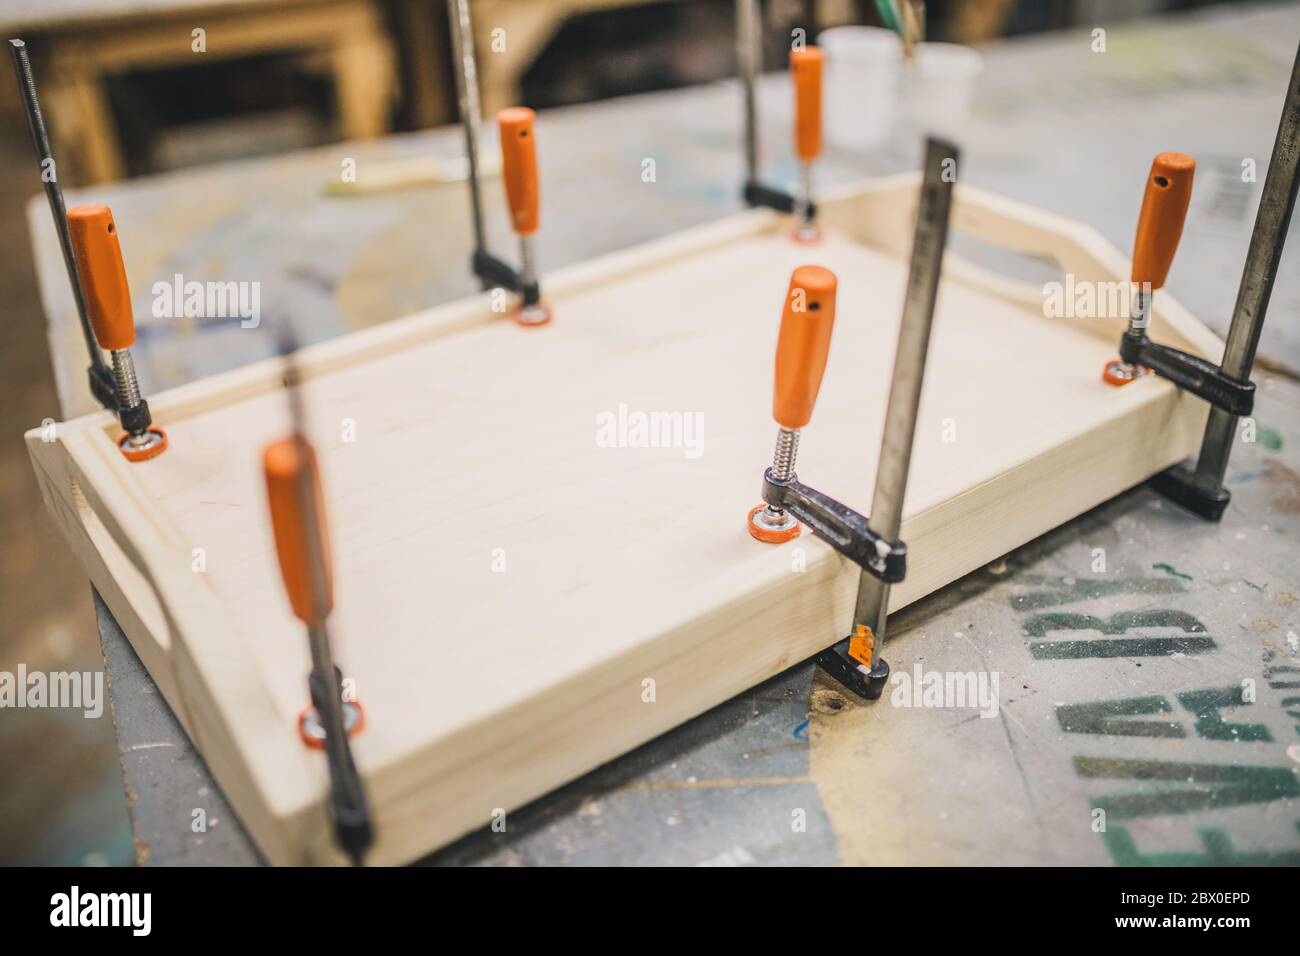 A rectangular tray in a carpentry workshop fixed with clamps Stock Photo